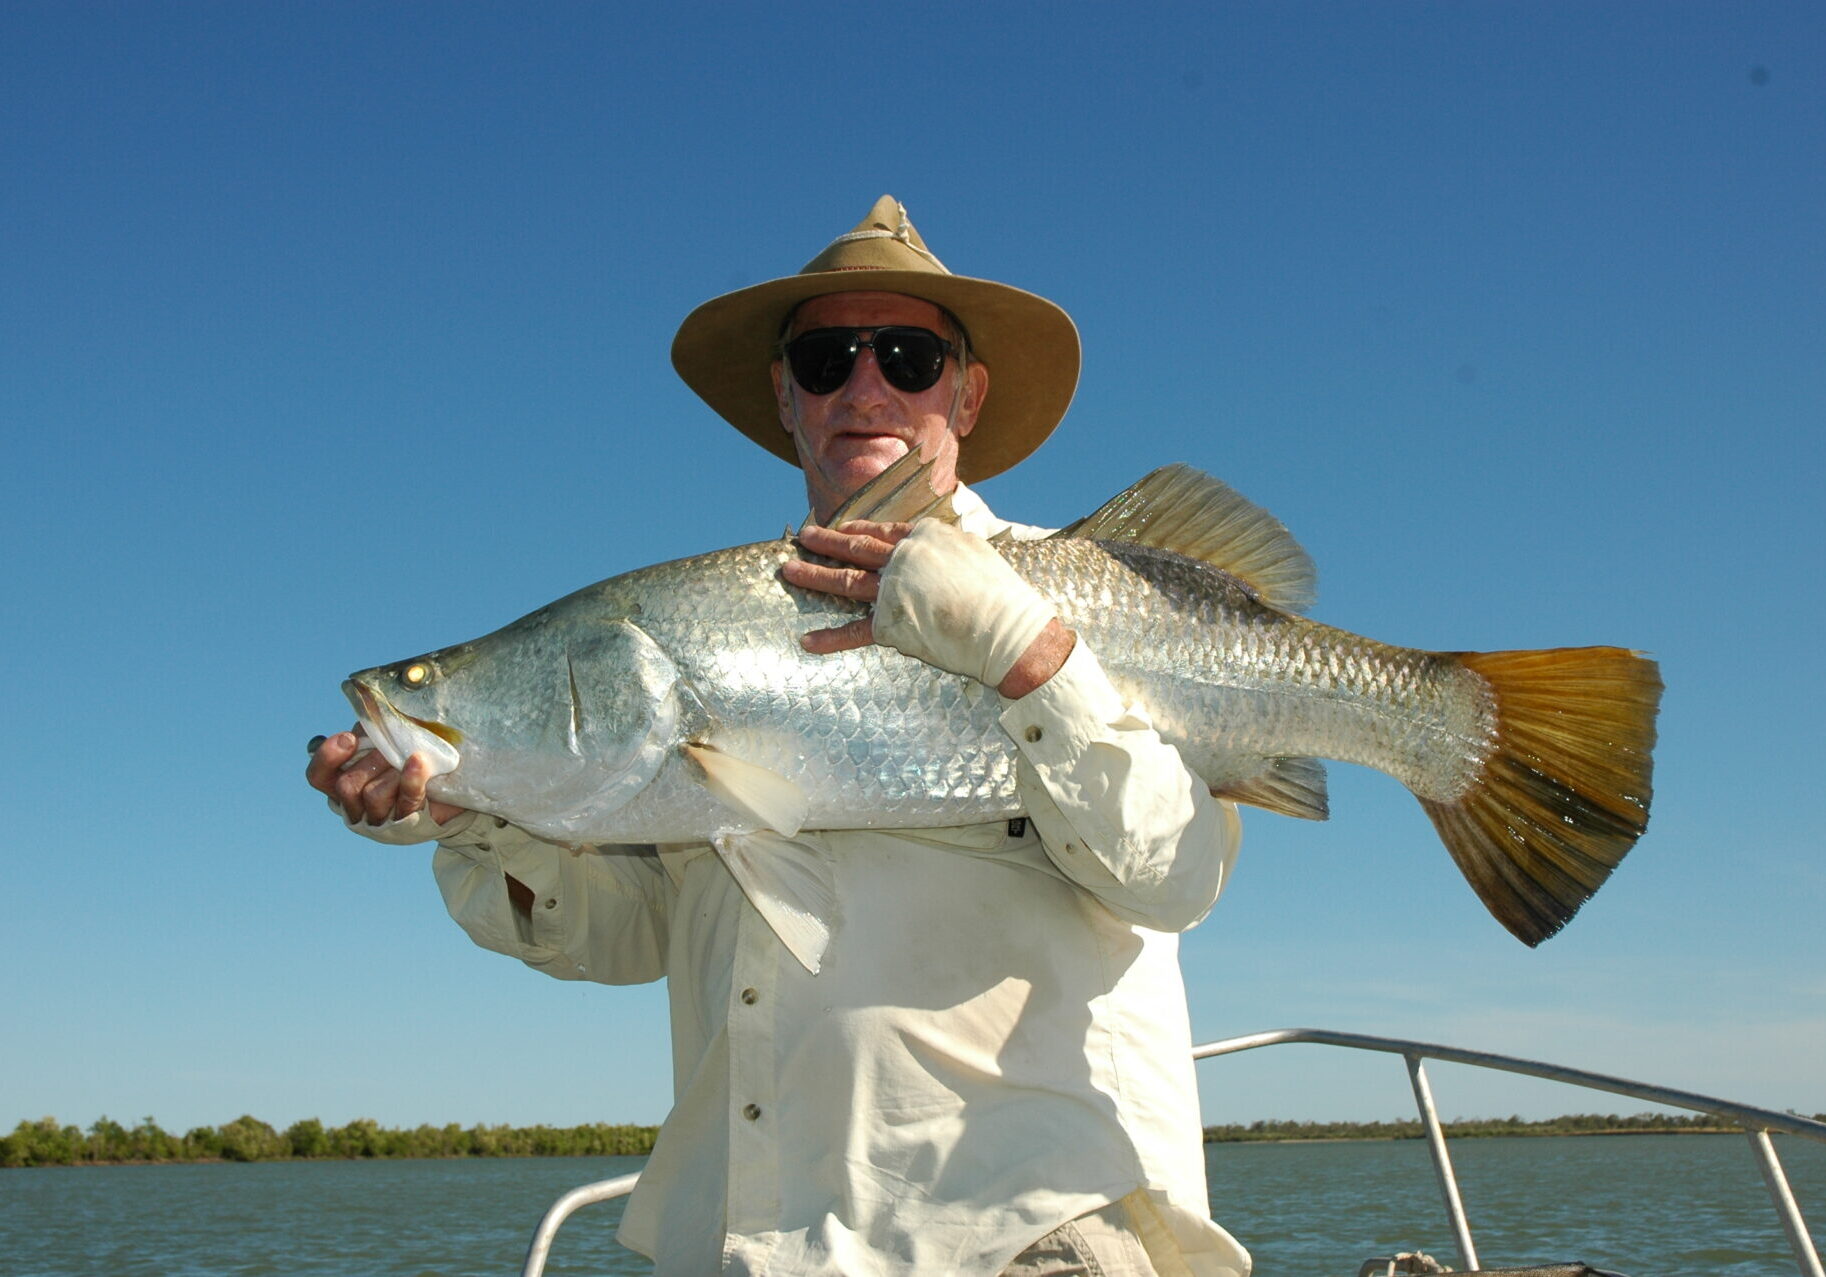 Barramundi dreaming is what the Cape is all about, but few areas on the east coast offer sustainable fishing.